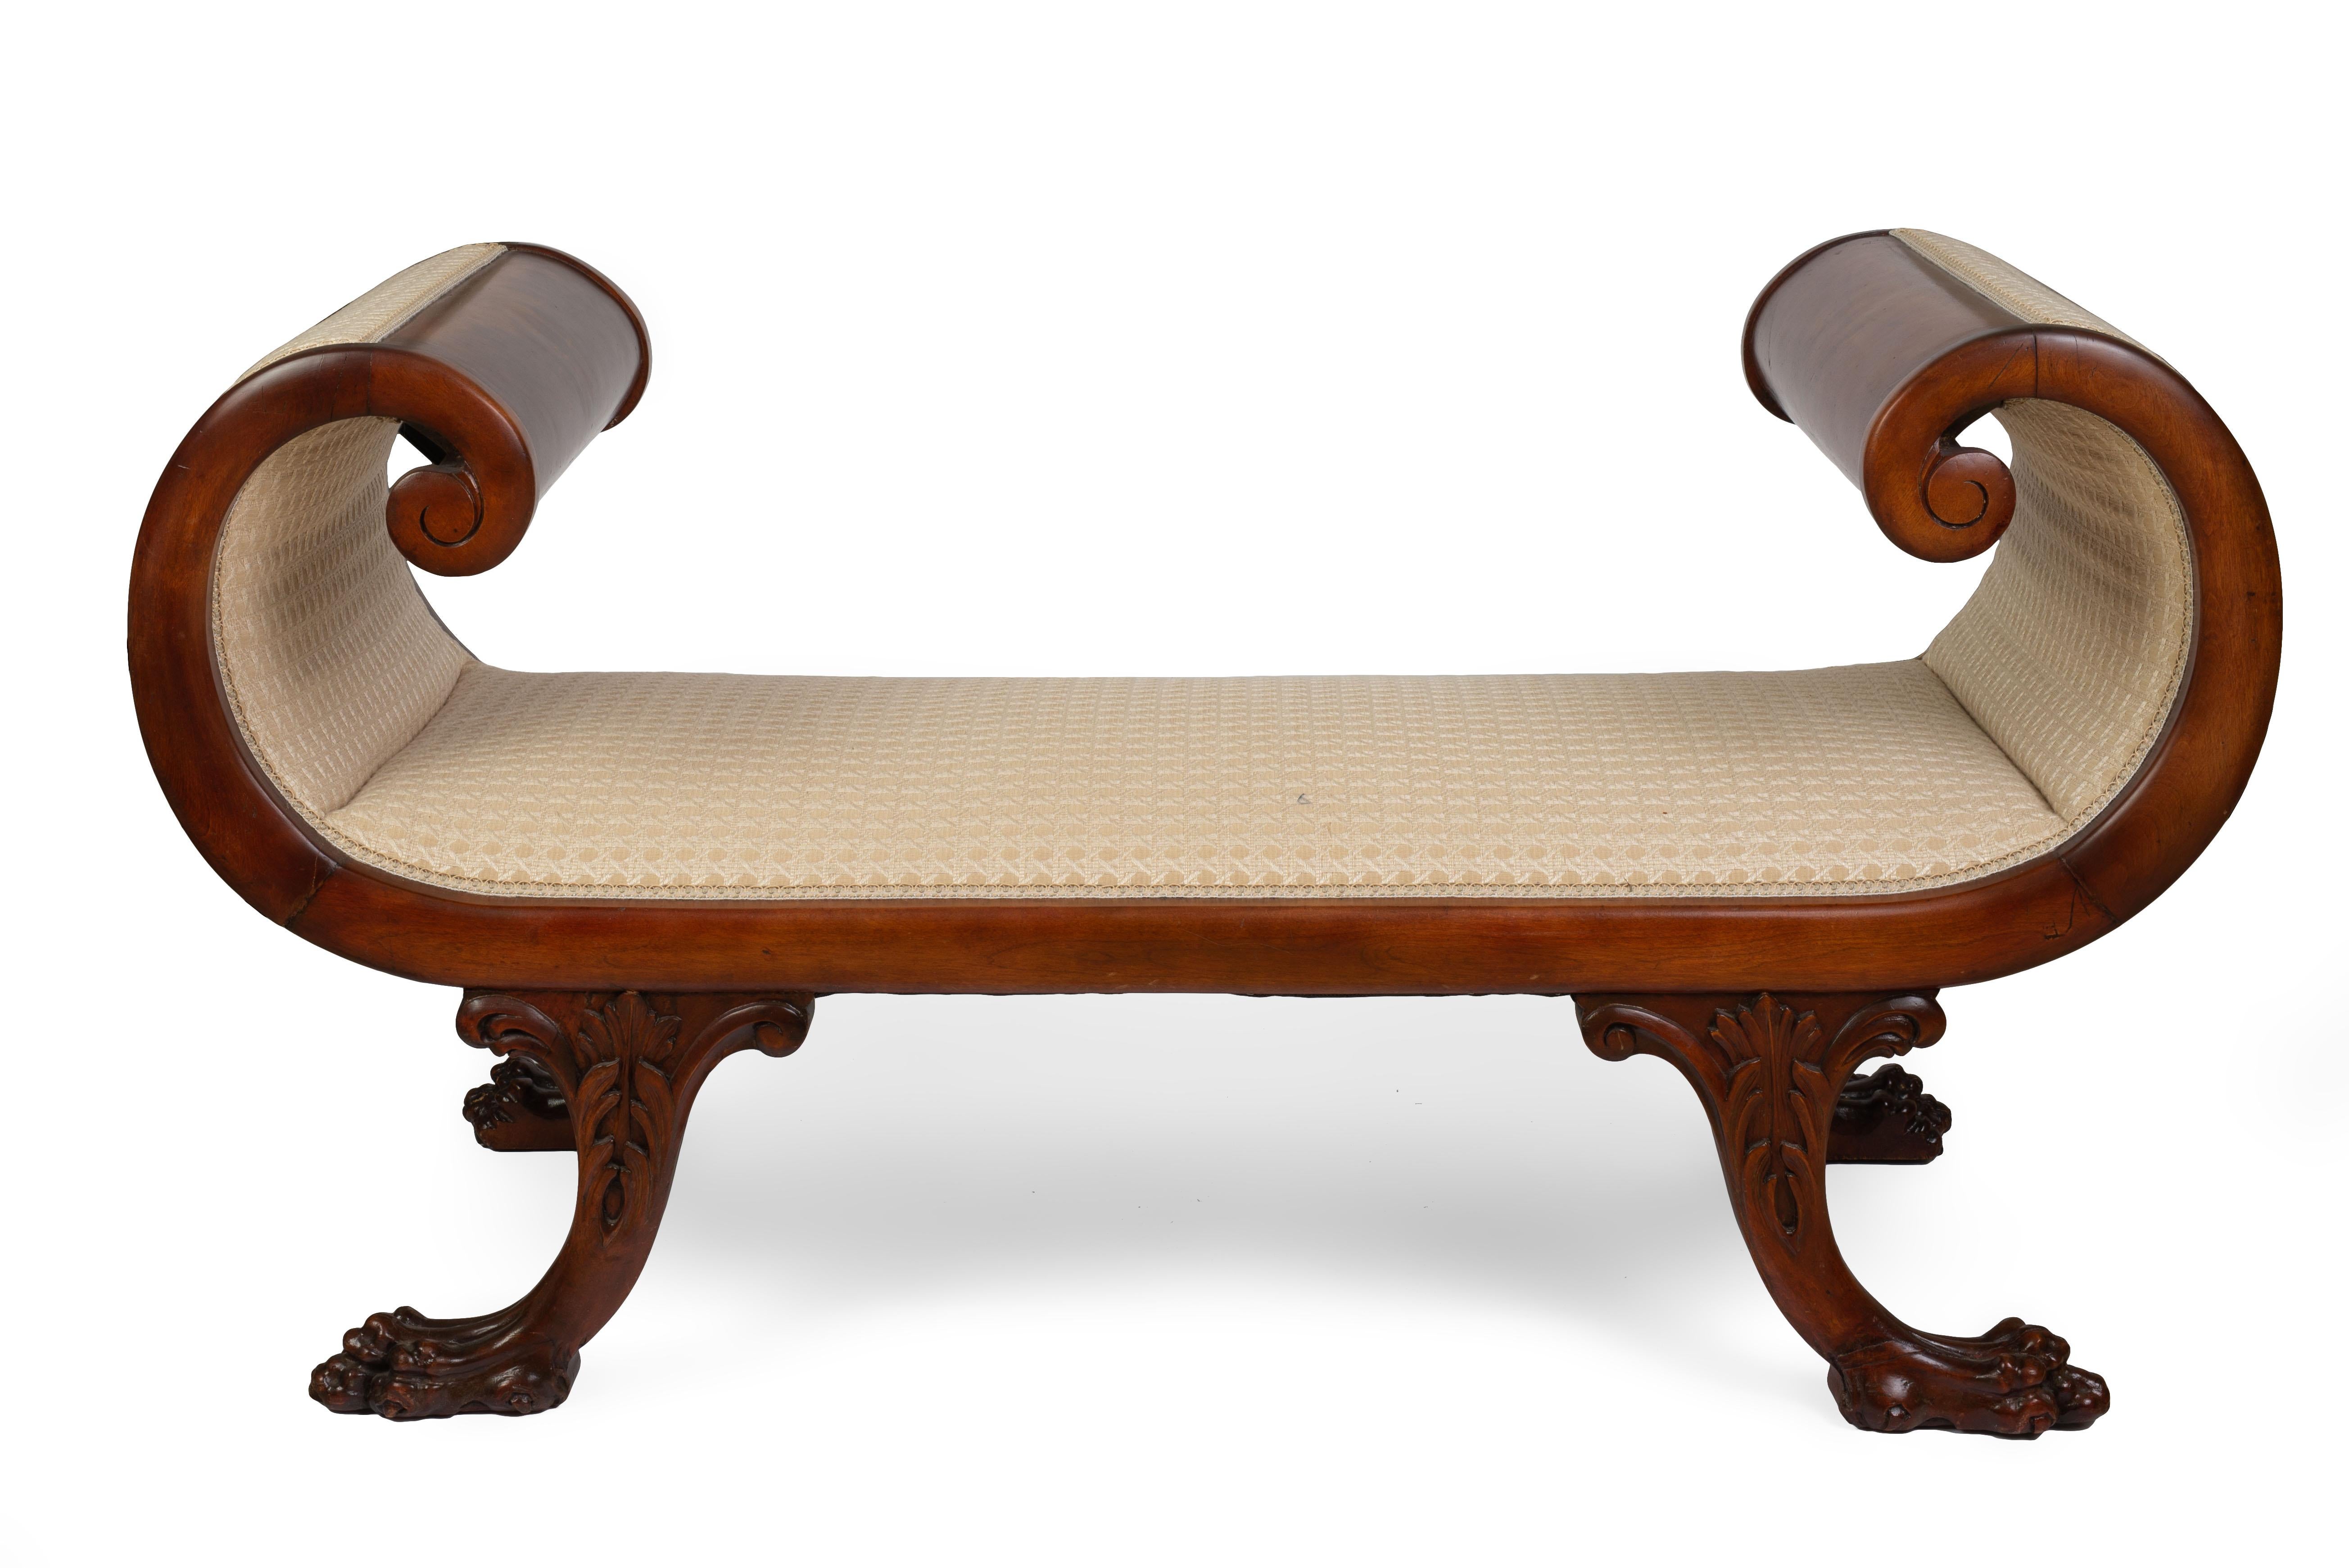 The rectangular seat and scrolled arms upholstered, raised on splayed foliate carved legs ending in paw feet.